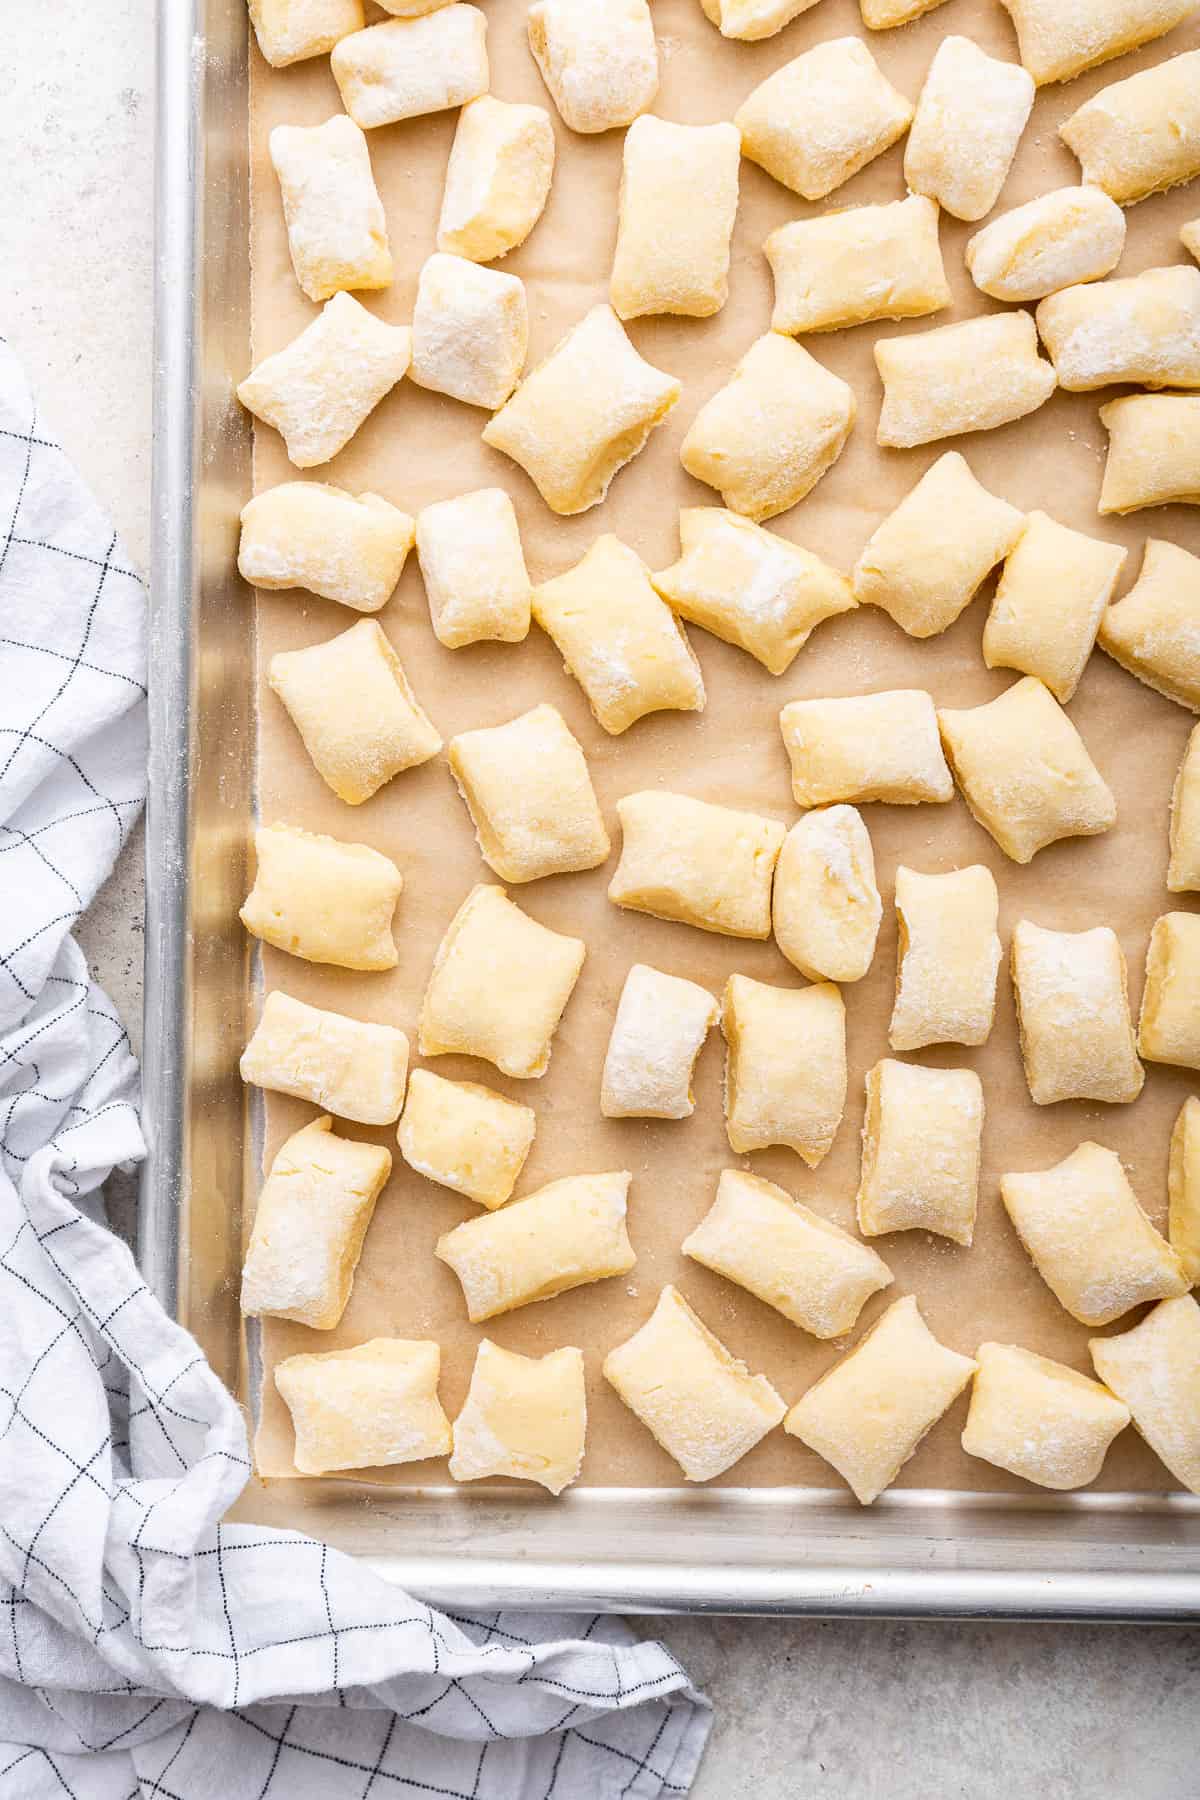 Potato gnocchi on parchment lined baking tray.